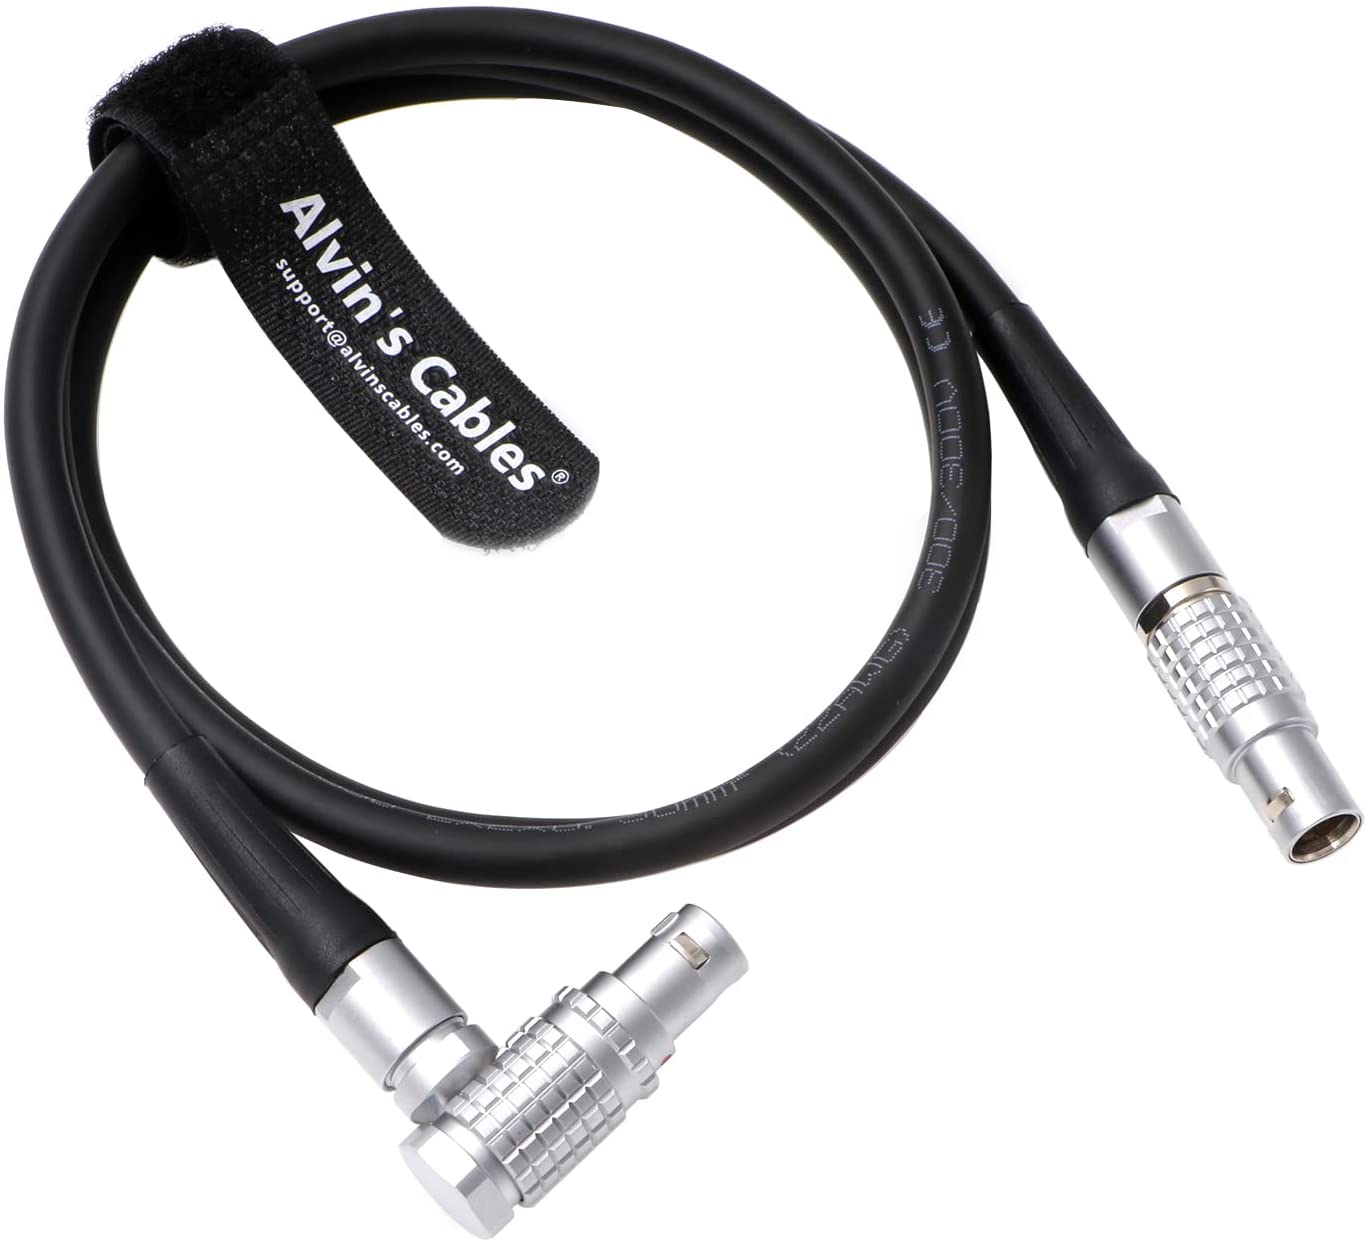 Power-Cable for RED Epic & Scarlet Camera from SmartSystem Matrix R2 4 Pin to 6 Pin Female Power Cable 1m|39.7inches